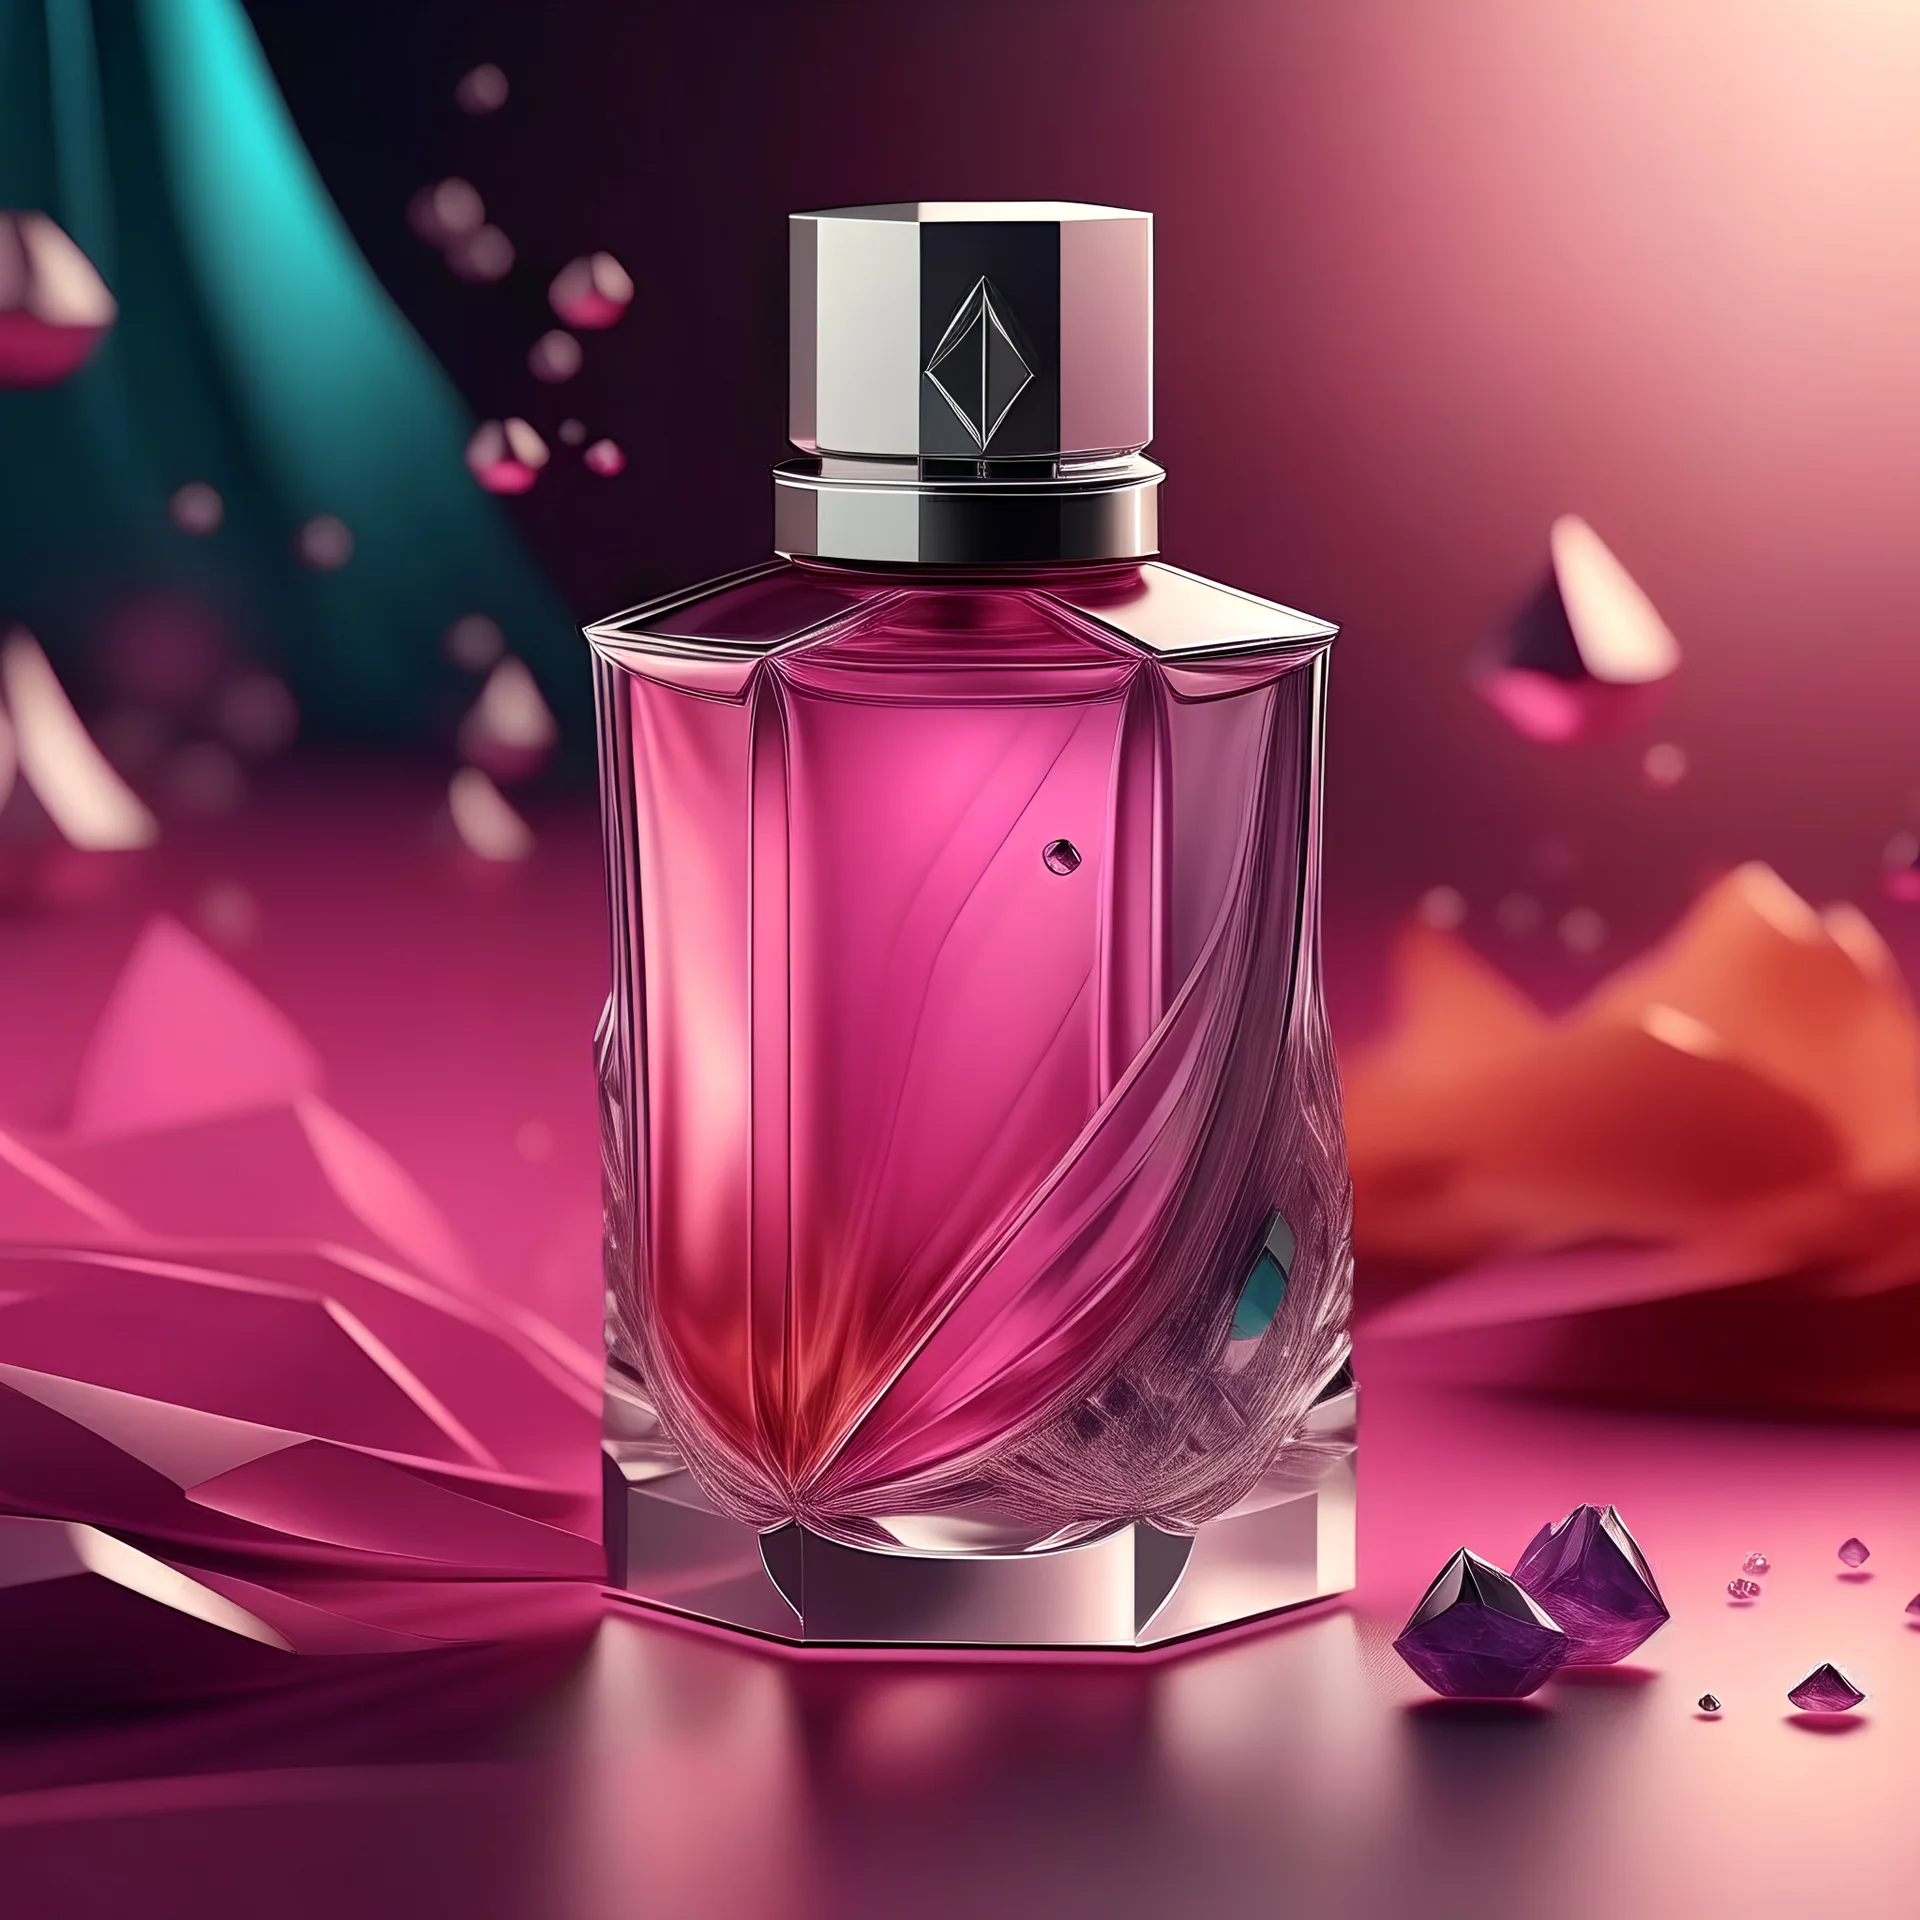 generate me an aesthetic image of perfume for Crystal Clear